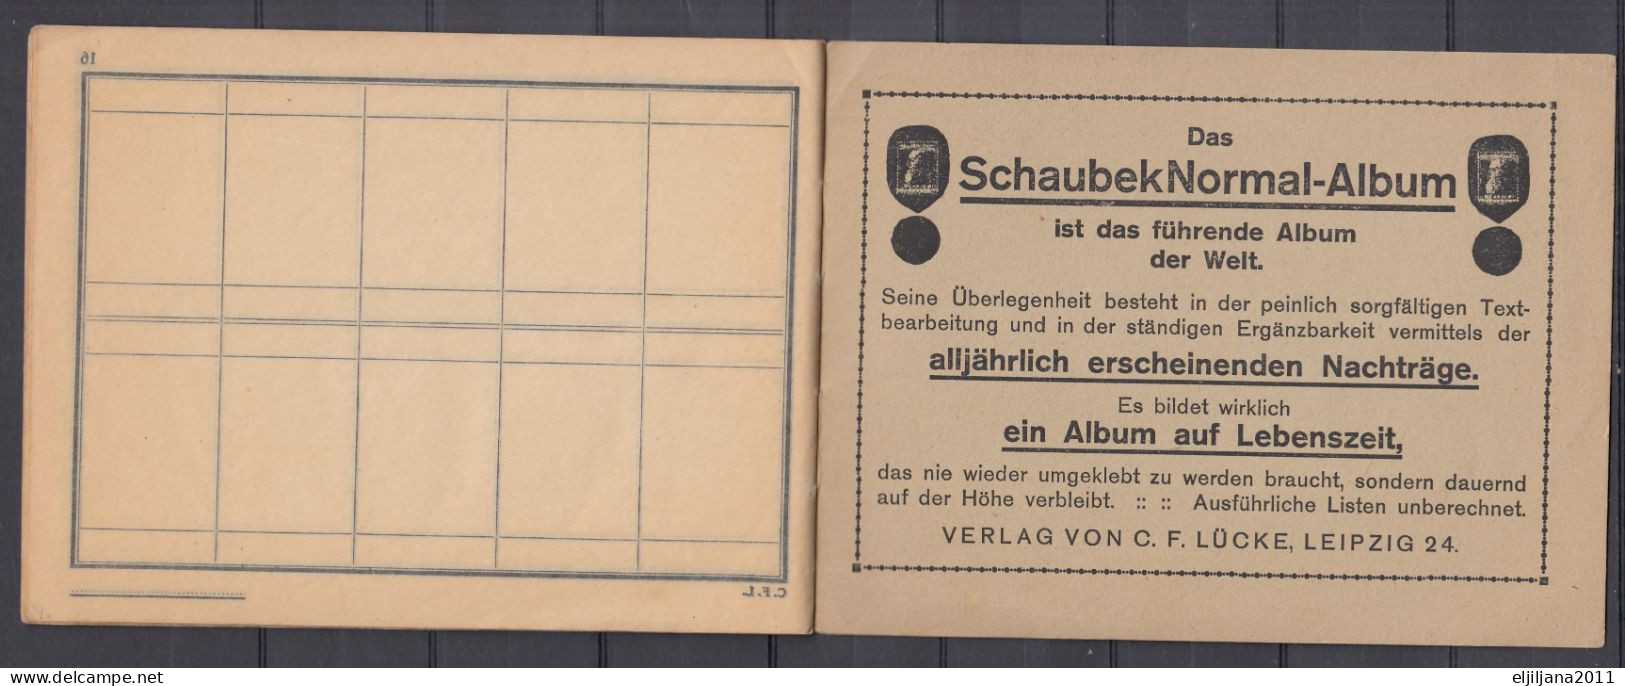 ⁕ Yugoslavia ⁕ old album - booklet with stamps (9 blank sheets) 14.5 x 11 cm ⁕ 74 used stamps - Tito / Partisans - scan